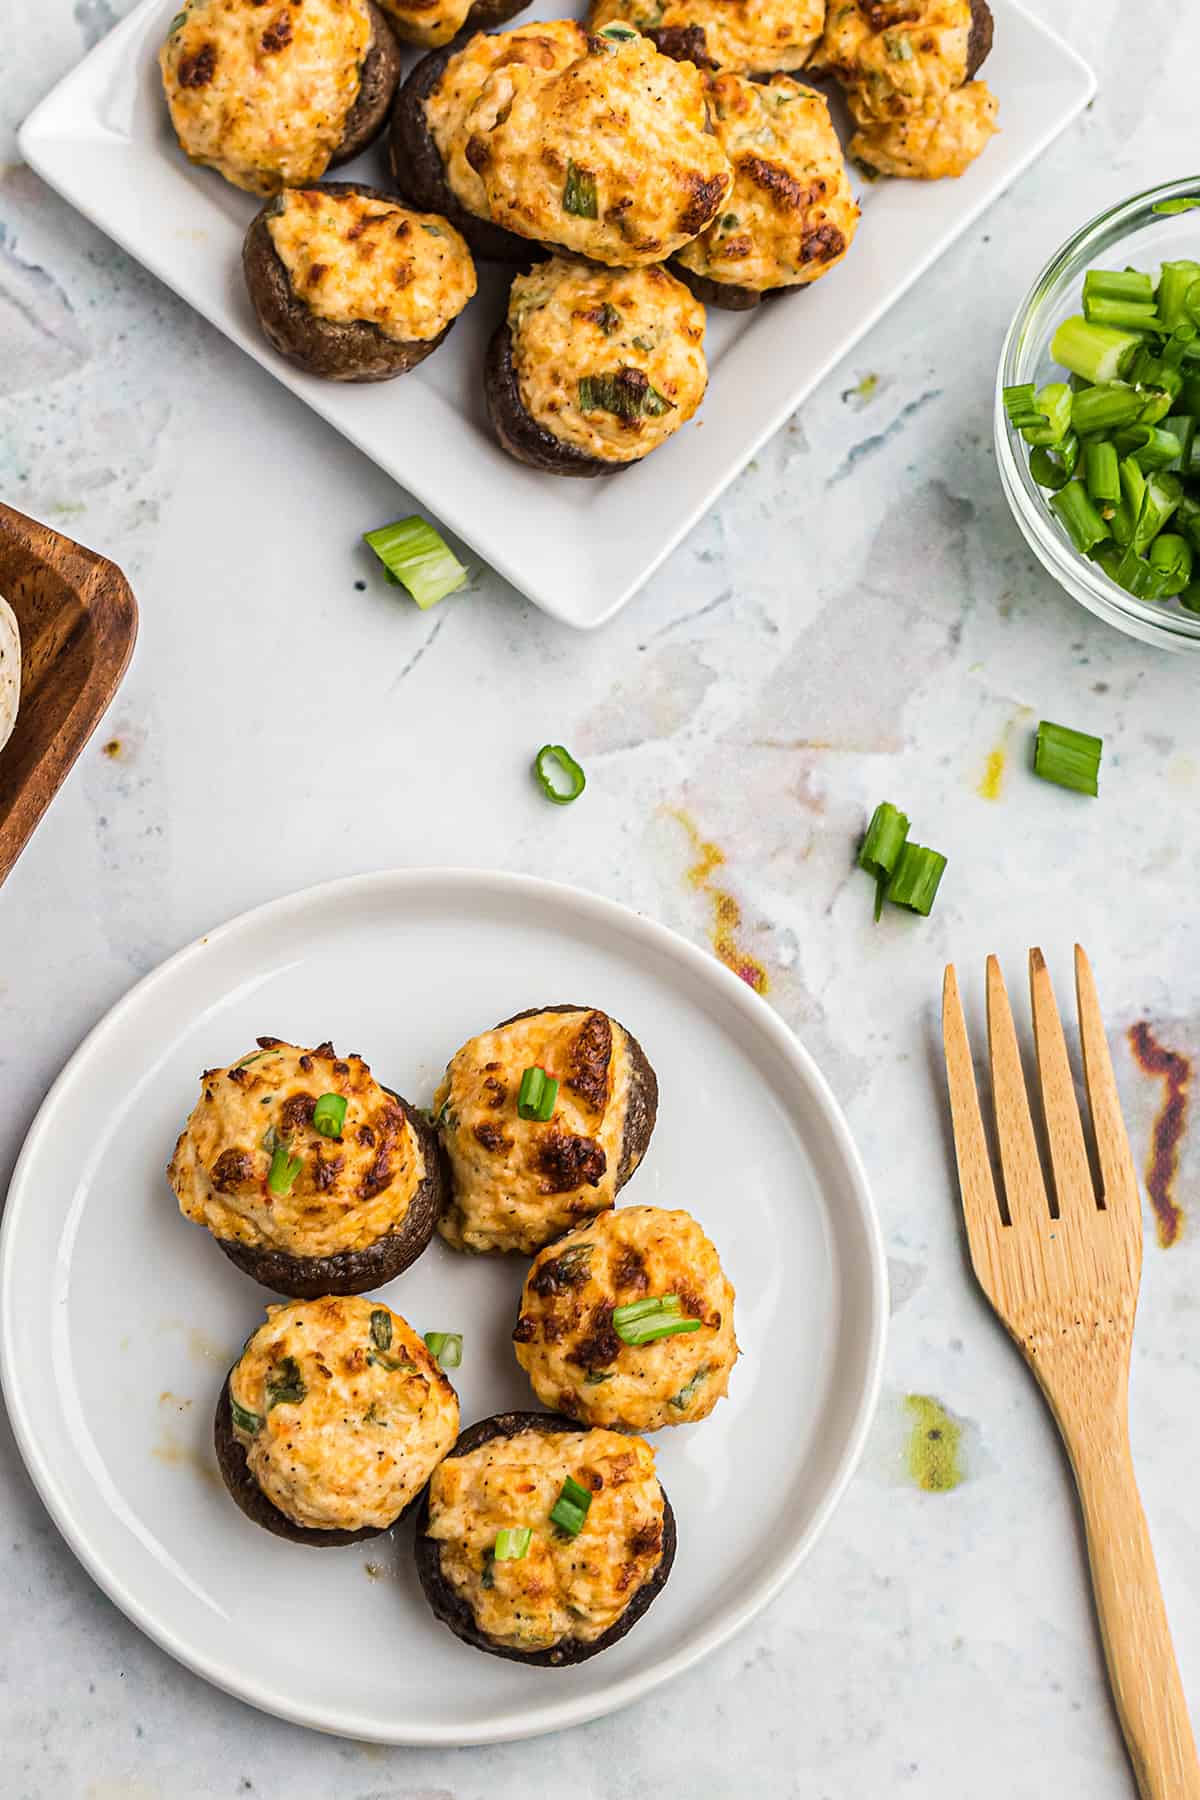 A top down view of plates containing keto stuffed mushrooms next to a wooden fork and a bowl containing chopped green onion.